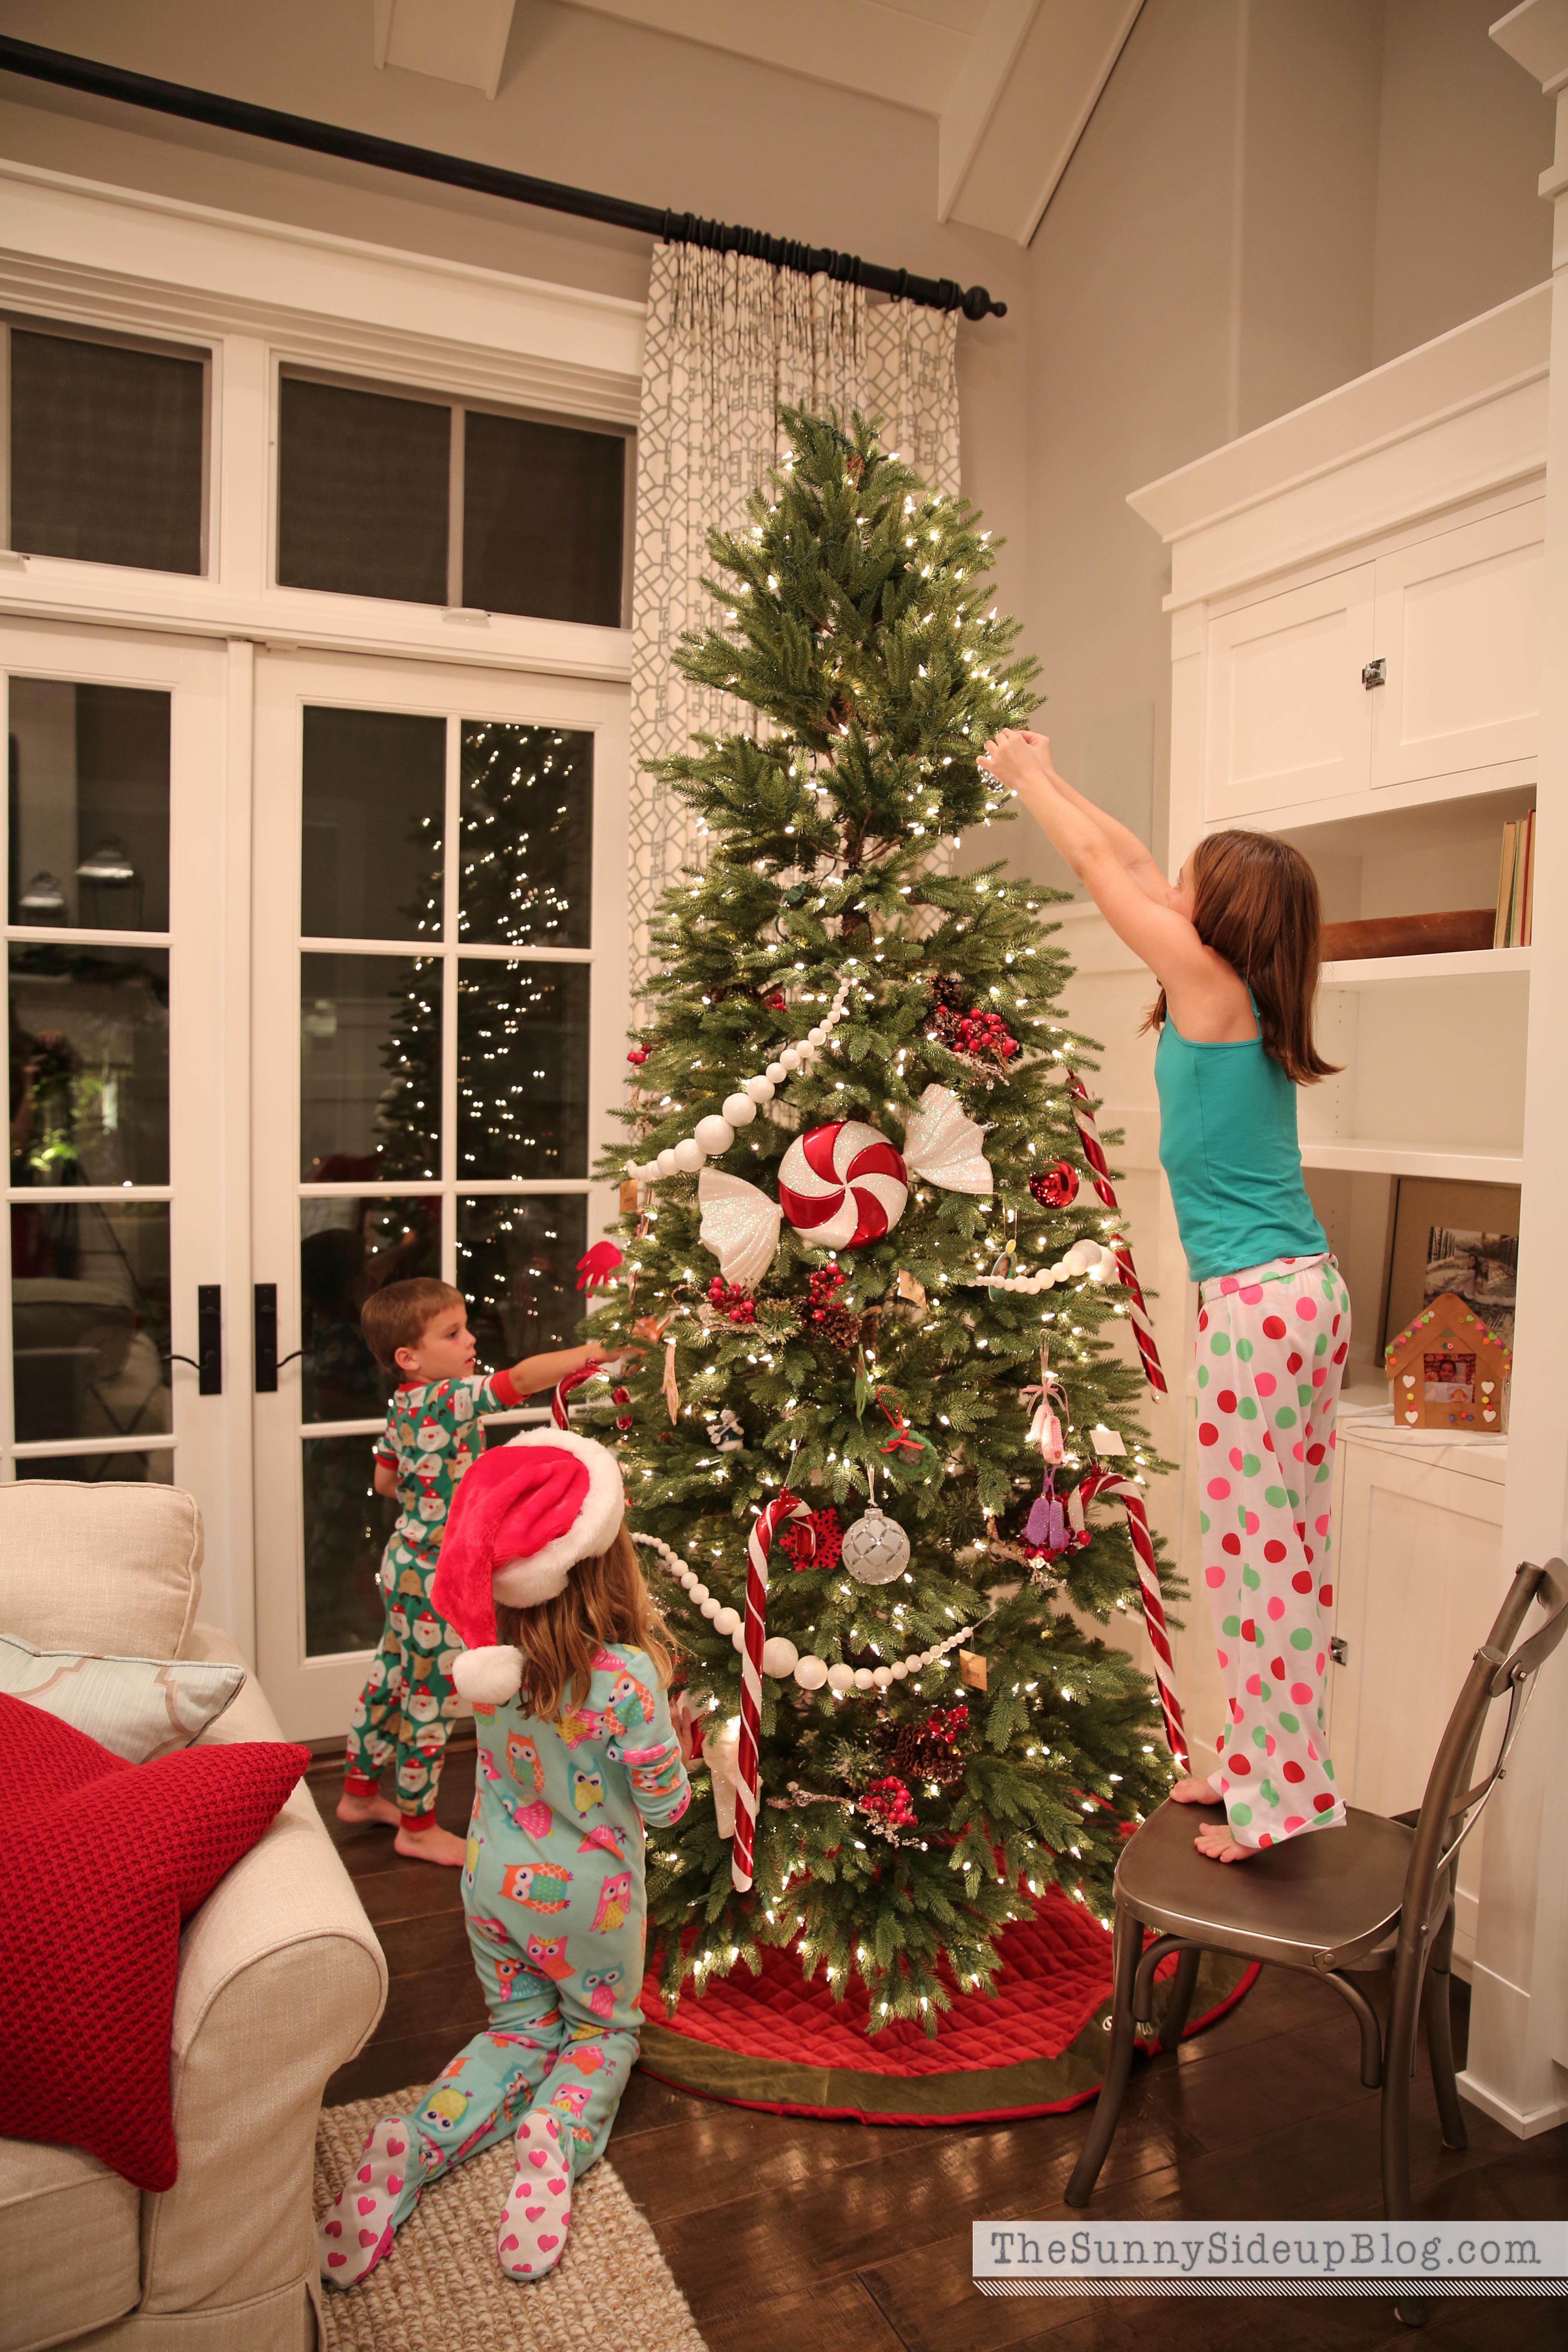 How to decoration a christmas tree step-by-step guide